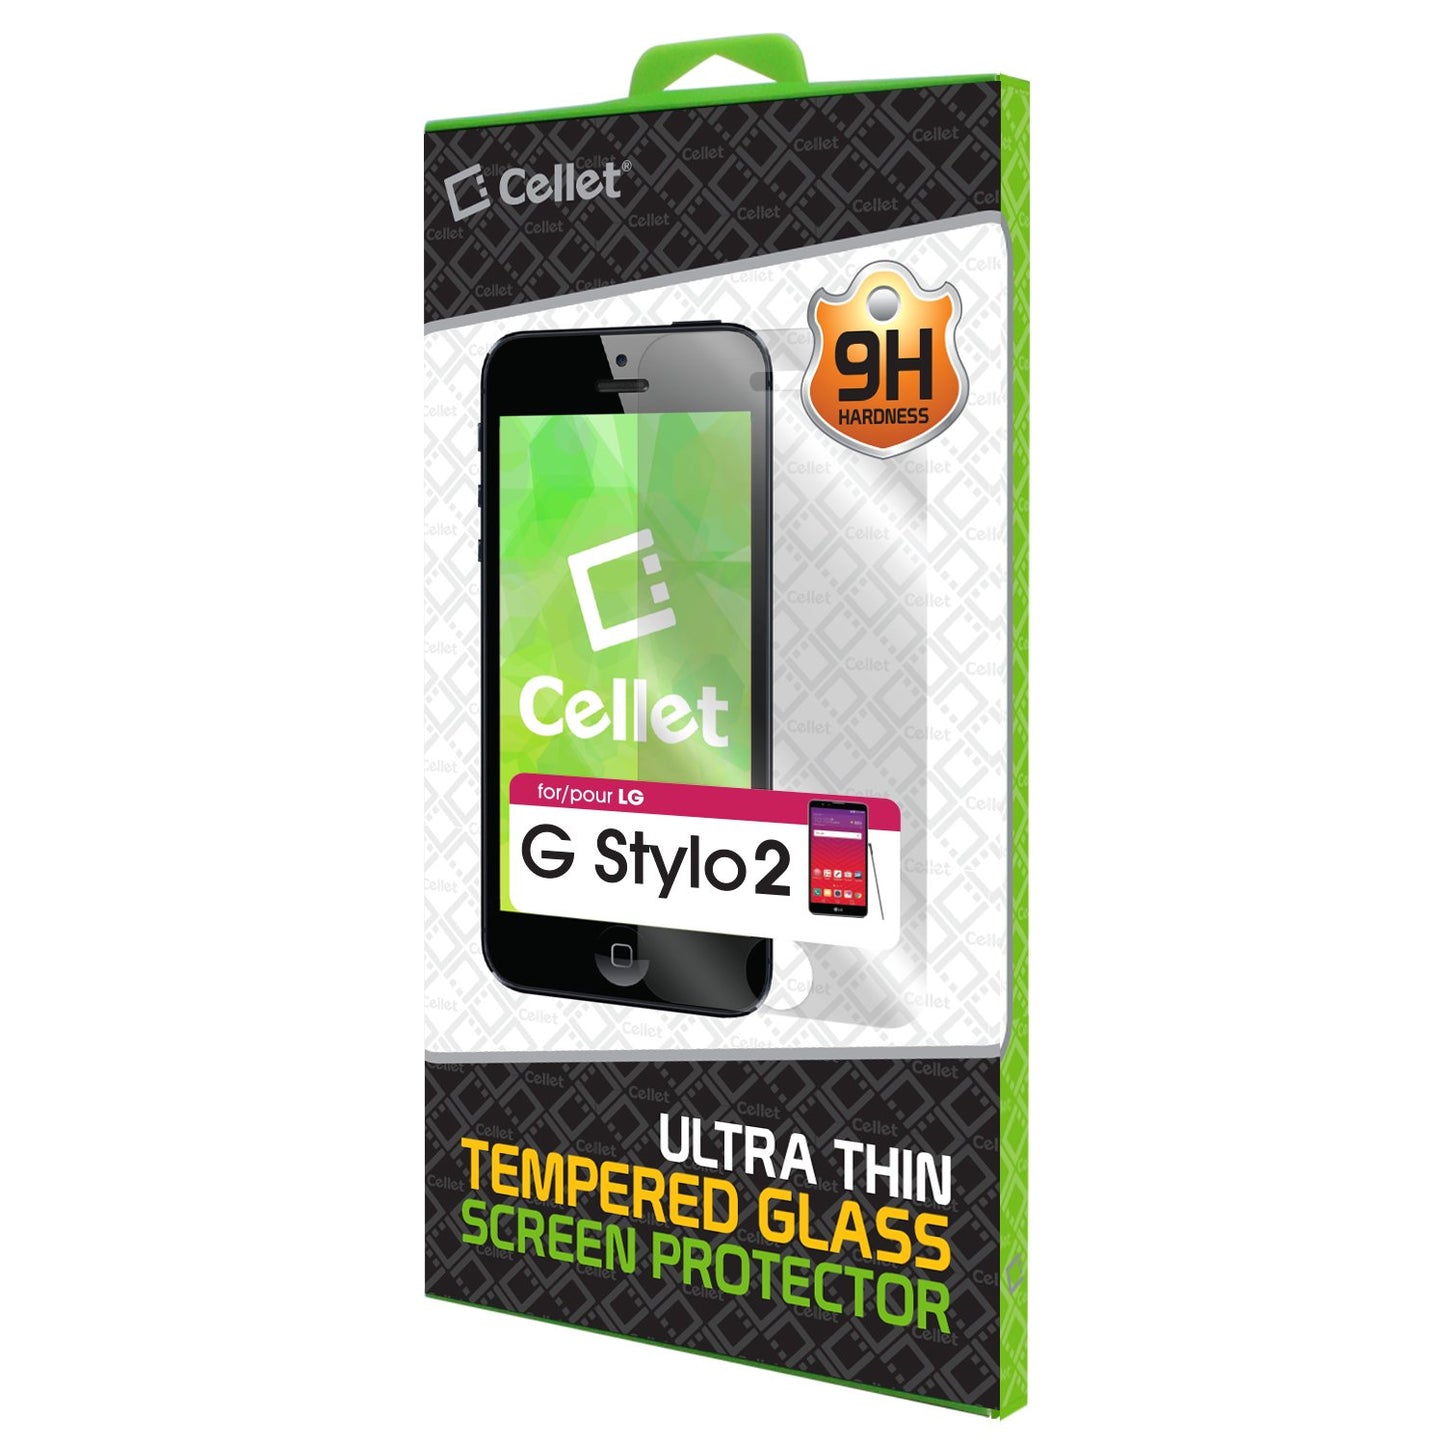 LG G Stylo 2 Glass Screen Protector, 0.33mm Tempered Glass for LG G Stylo 2